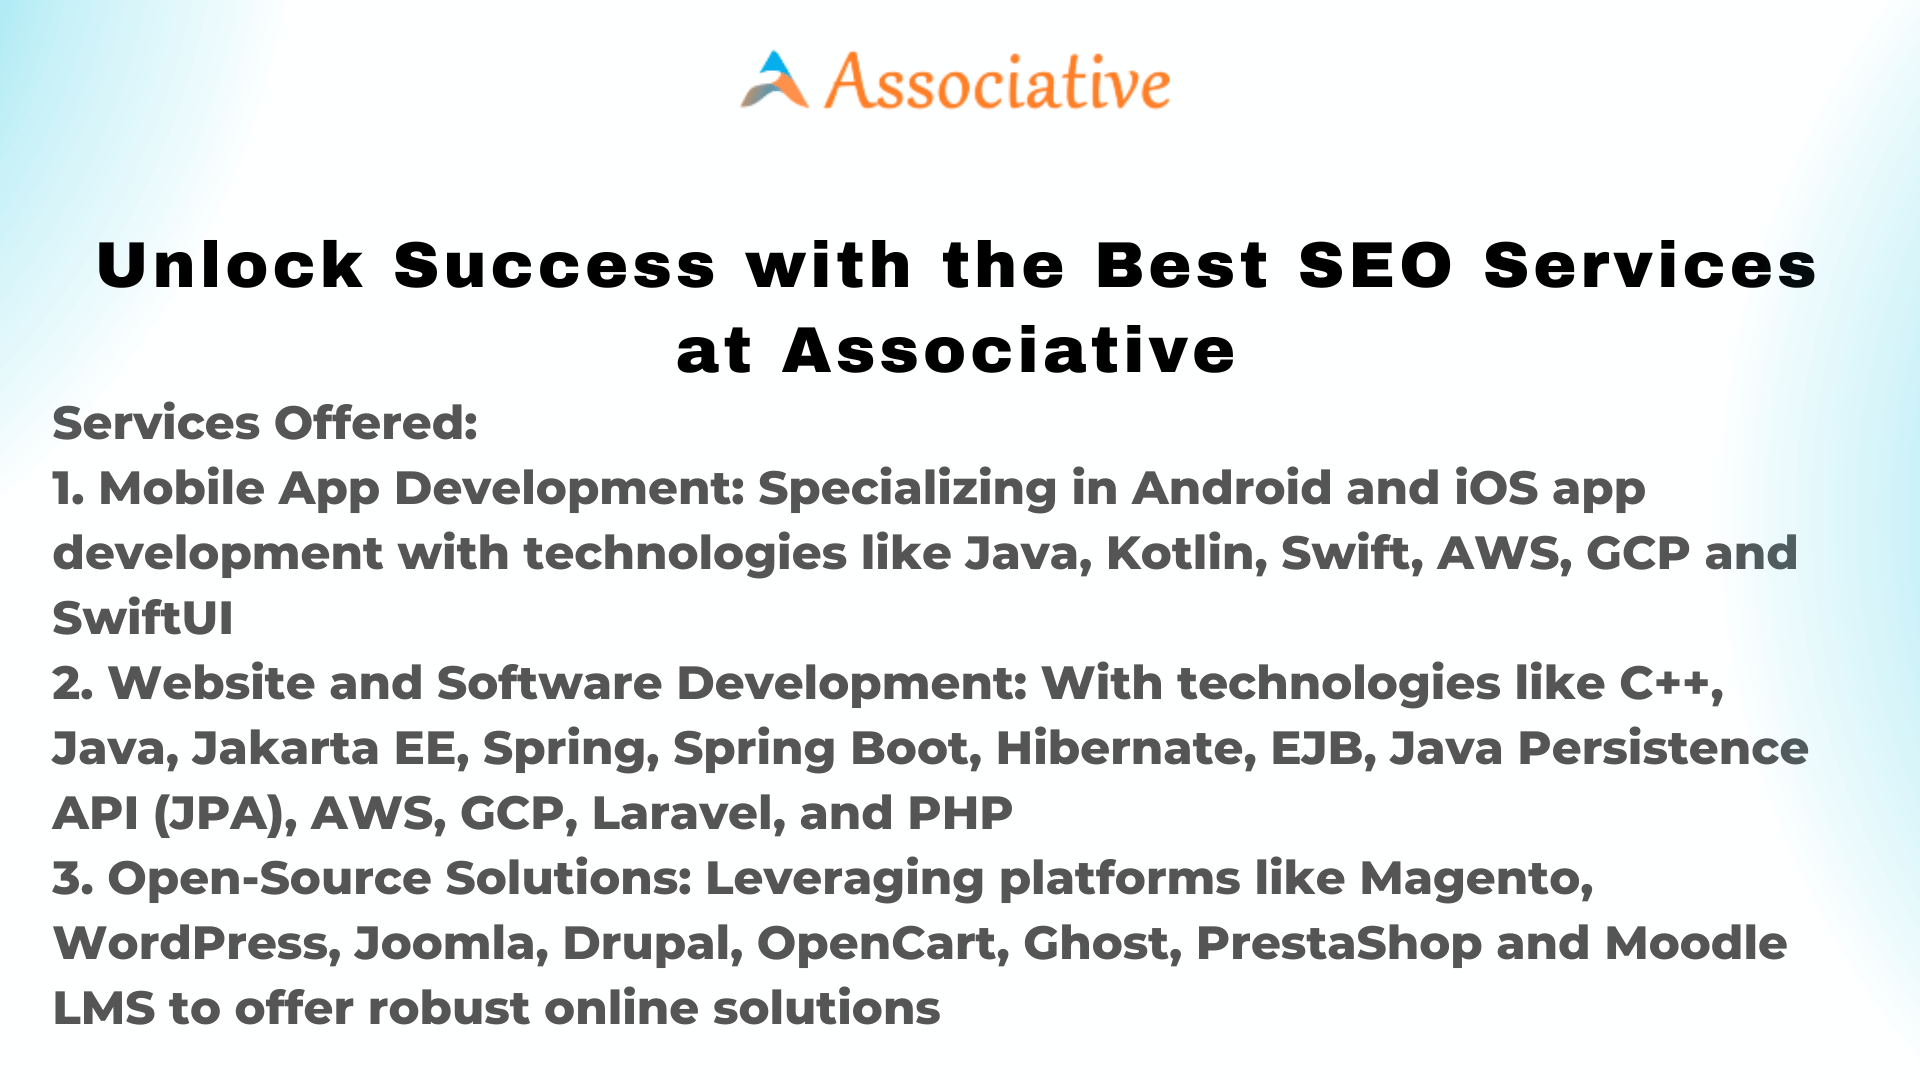 Unlock Success with the Best SEO Services at Associative